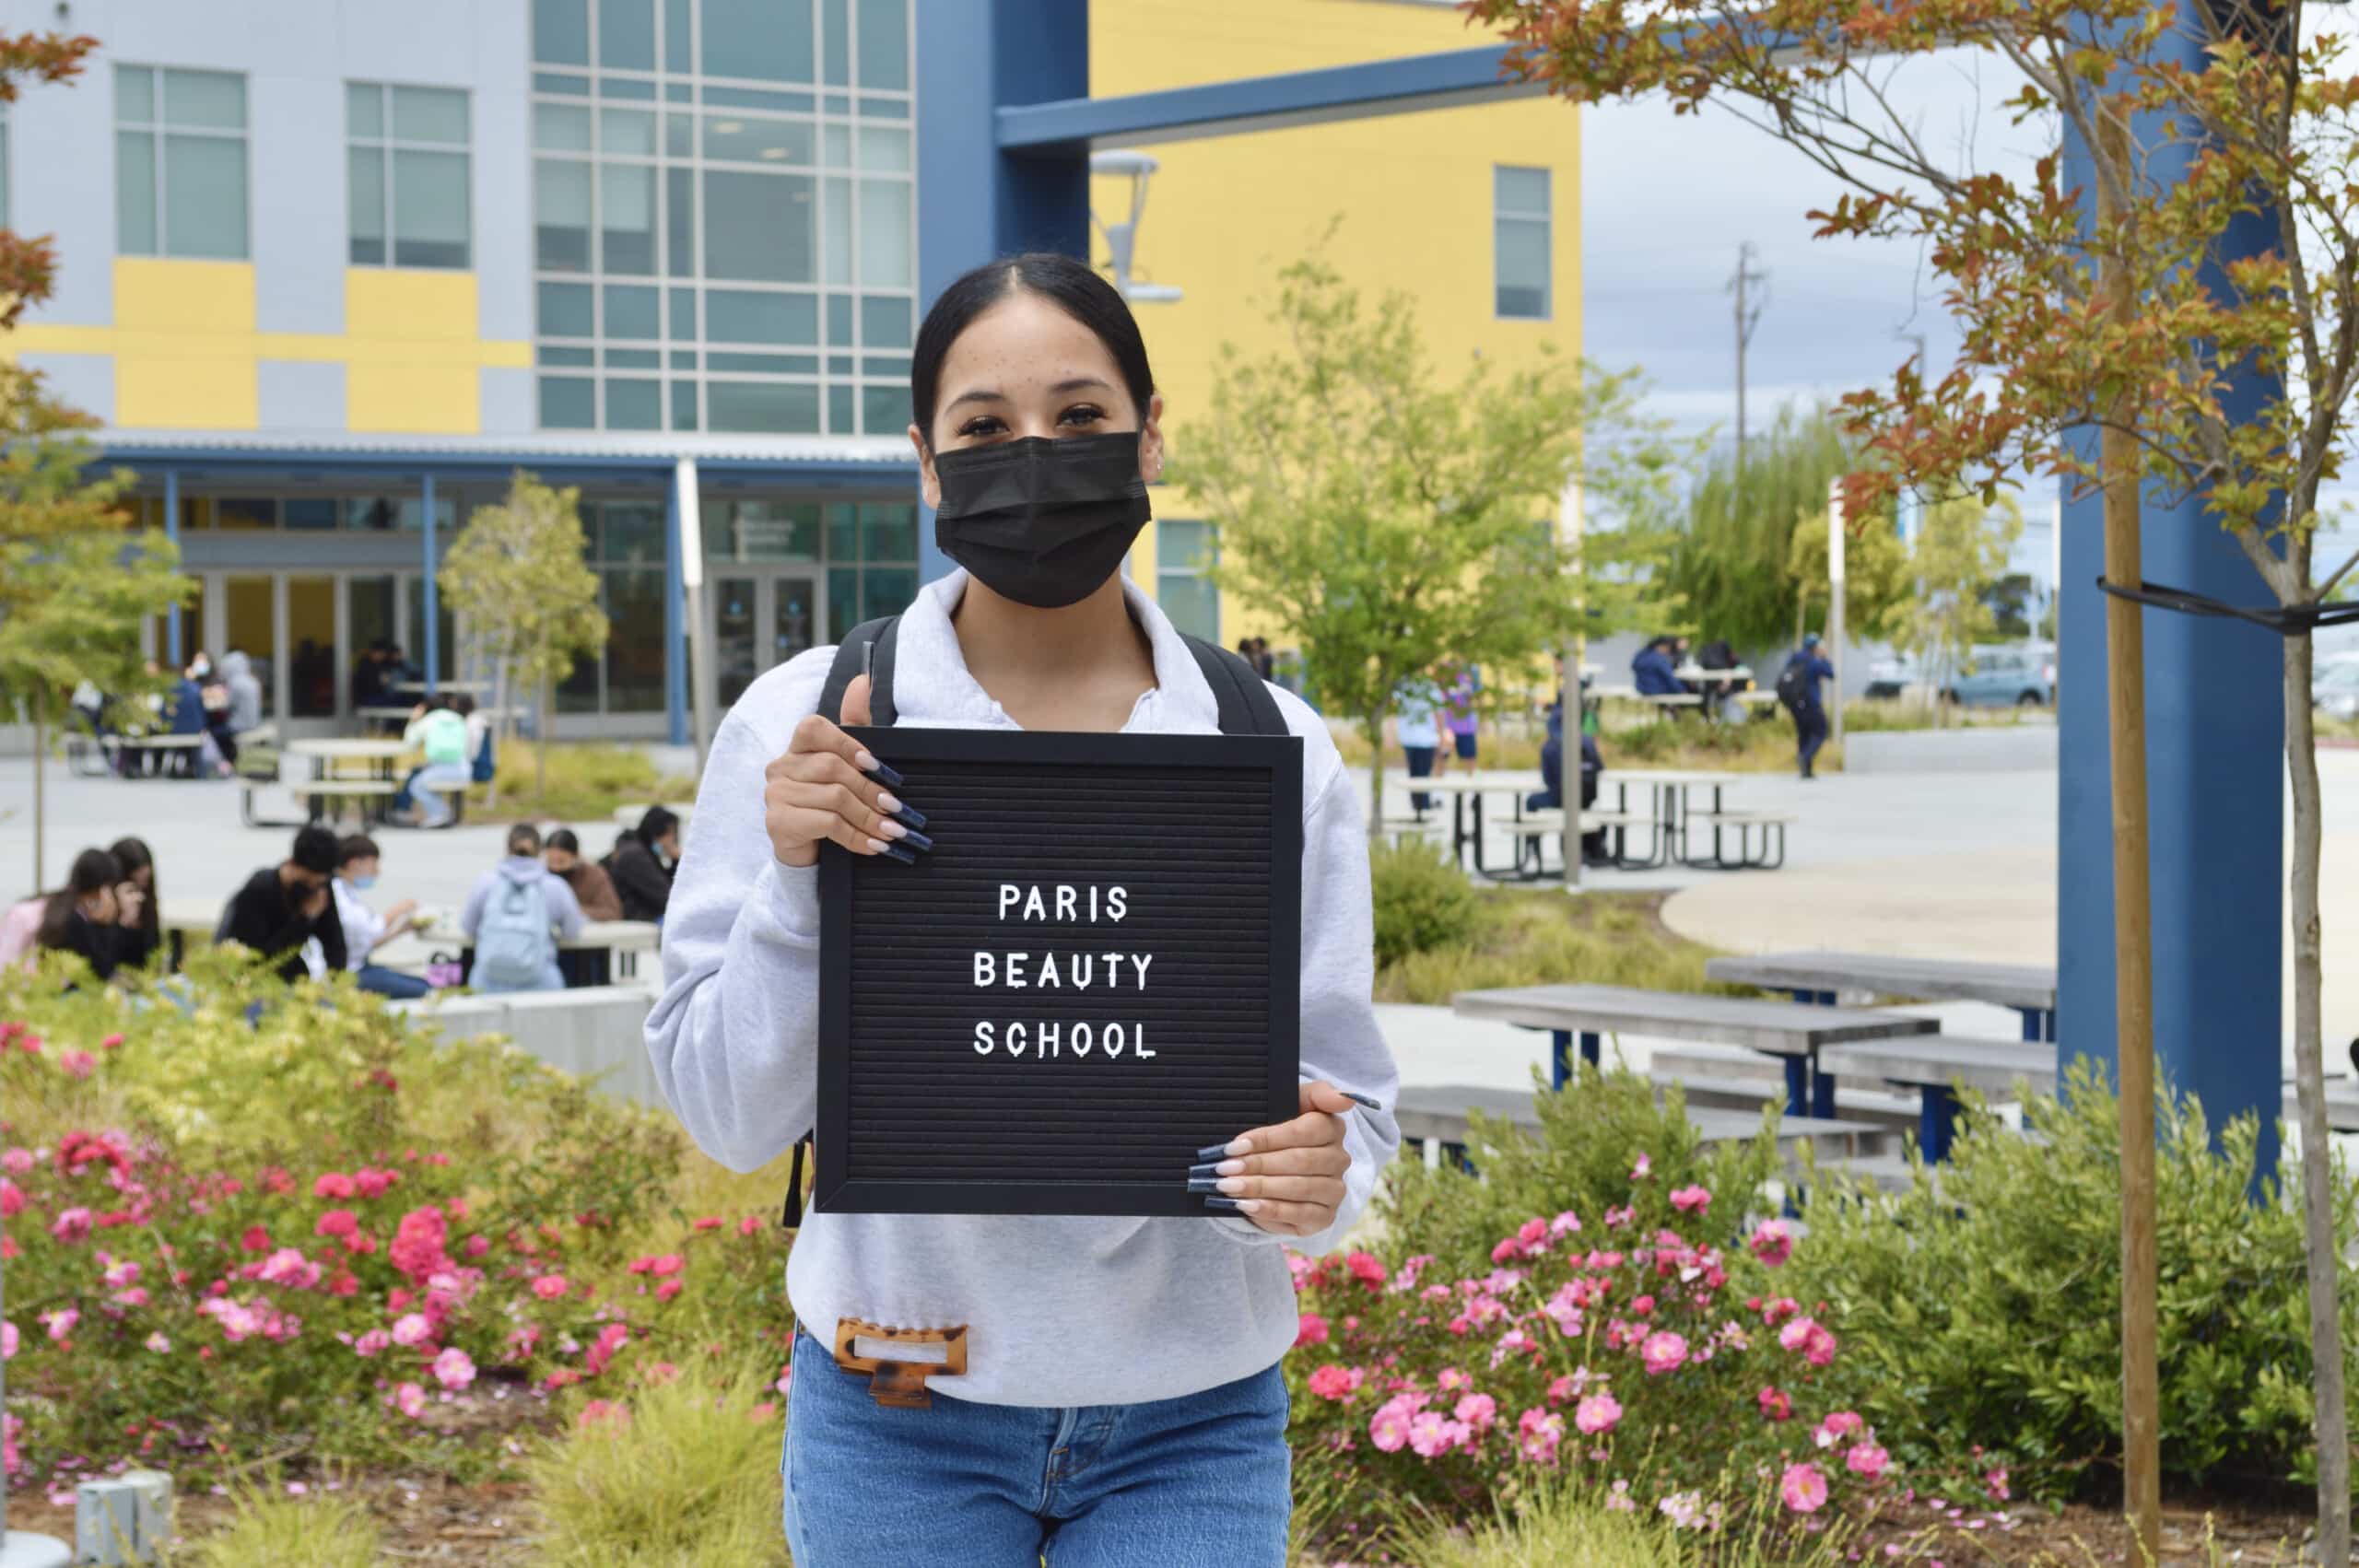 Making Waves Academy student holding Paris Beauty School sign